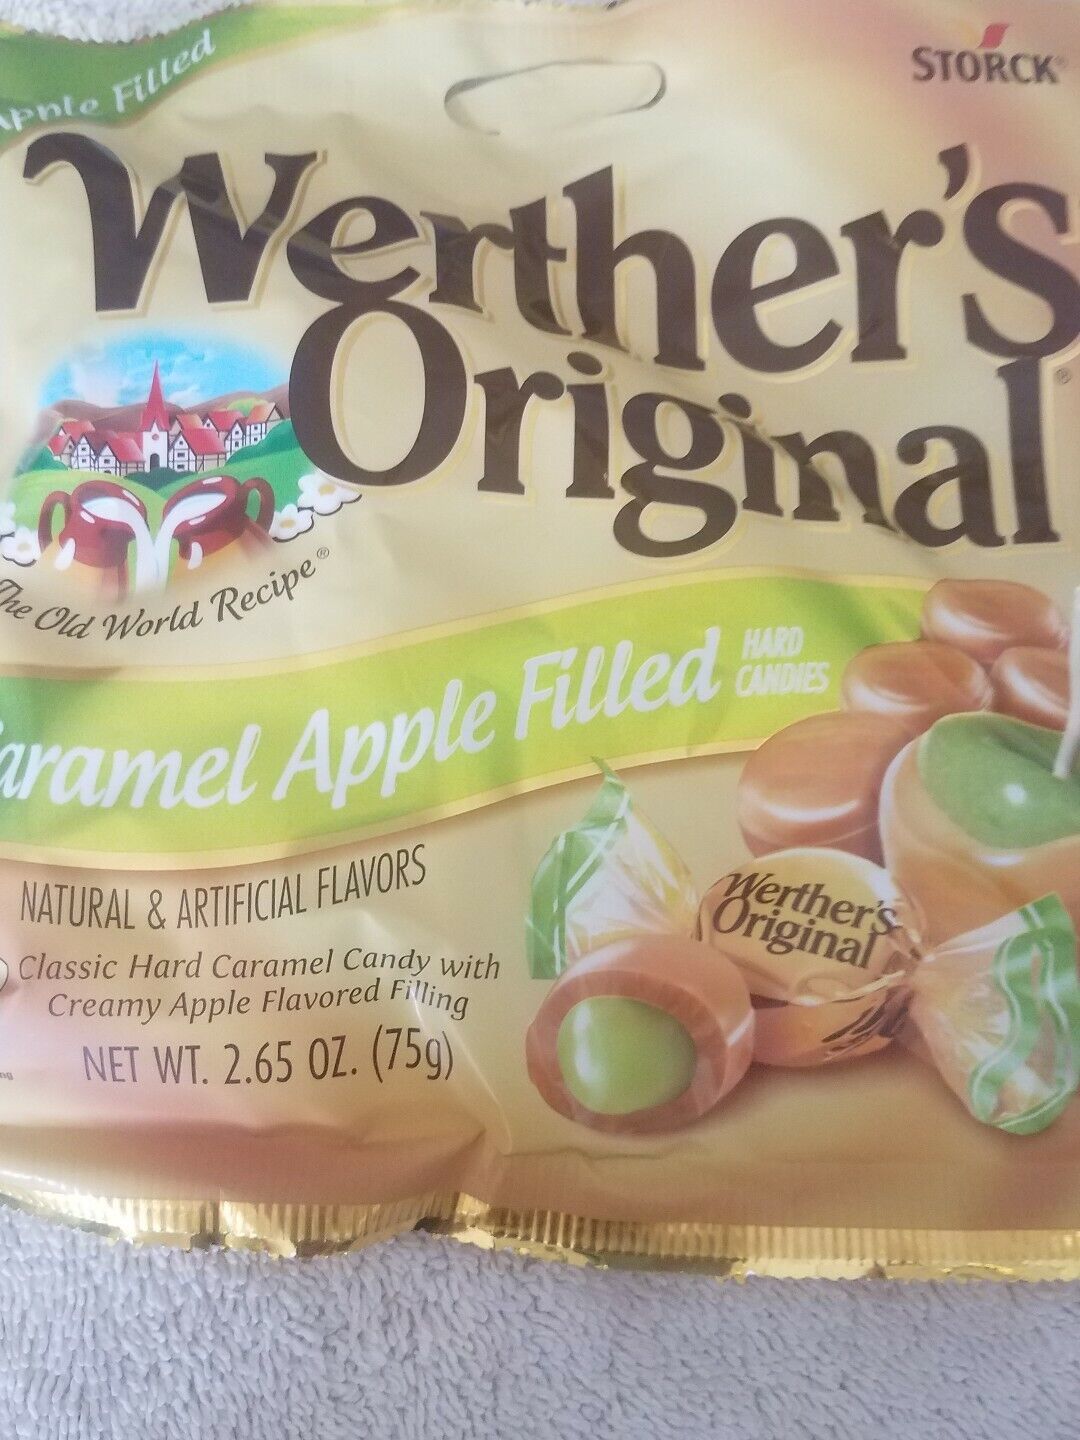 Primary image for Werther's Original Caramel Apple Filled Hard Candies upc 07279906512